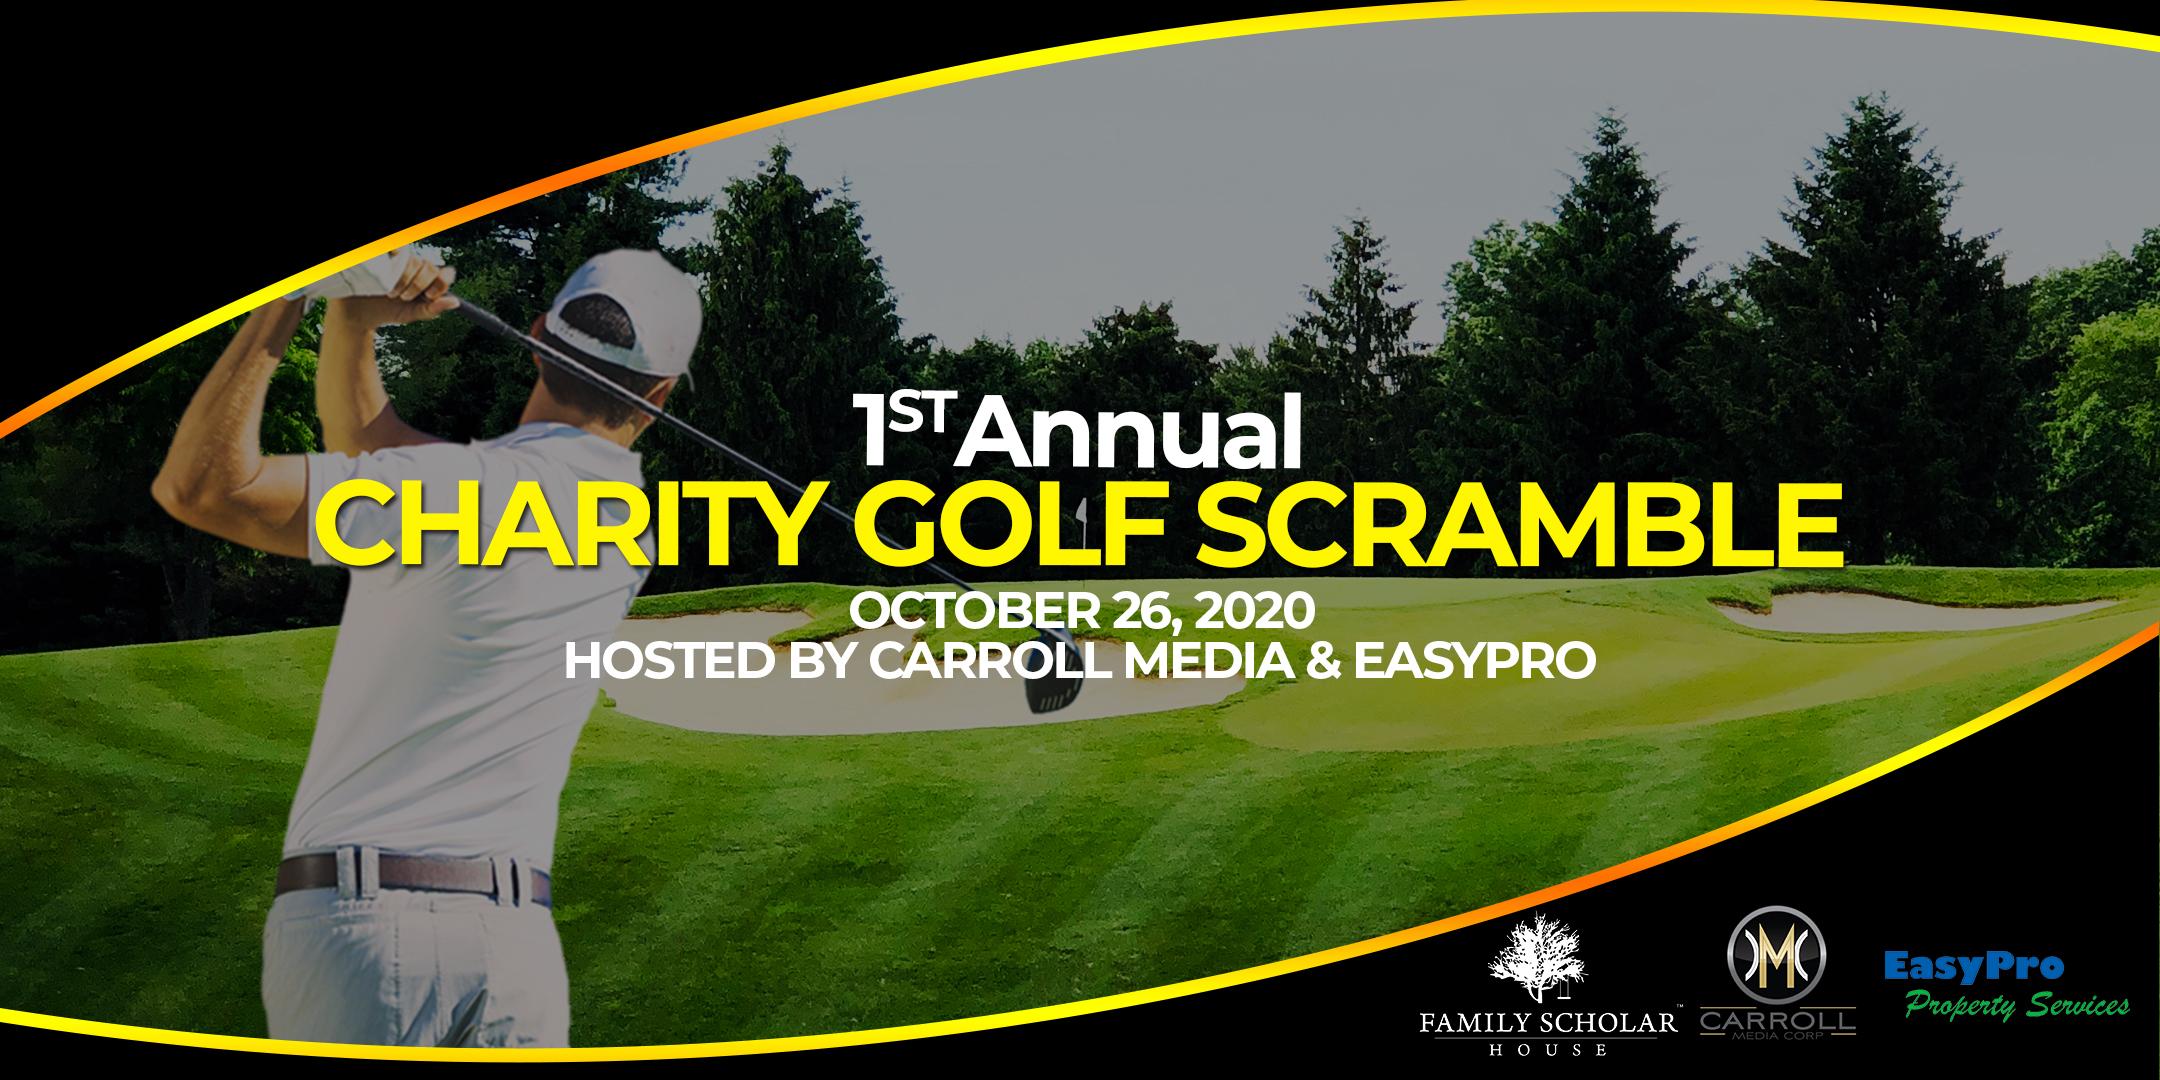 1st Annual Charity Golf Scramble - Hosted by Carroll Media and EasyPro